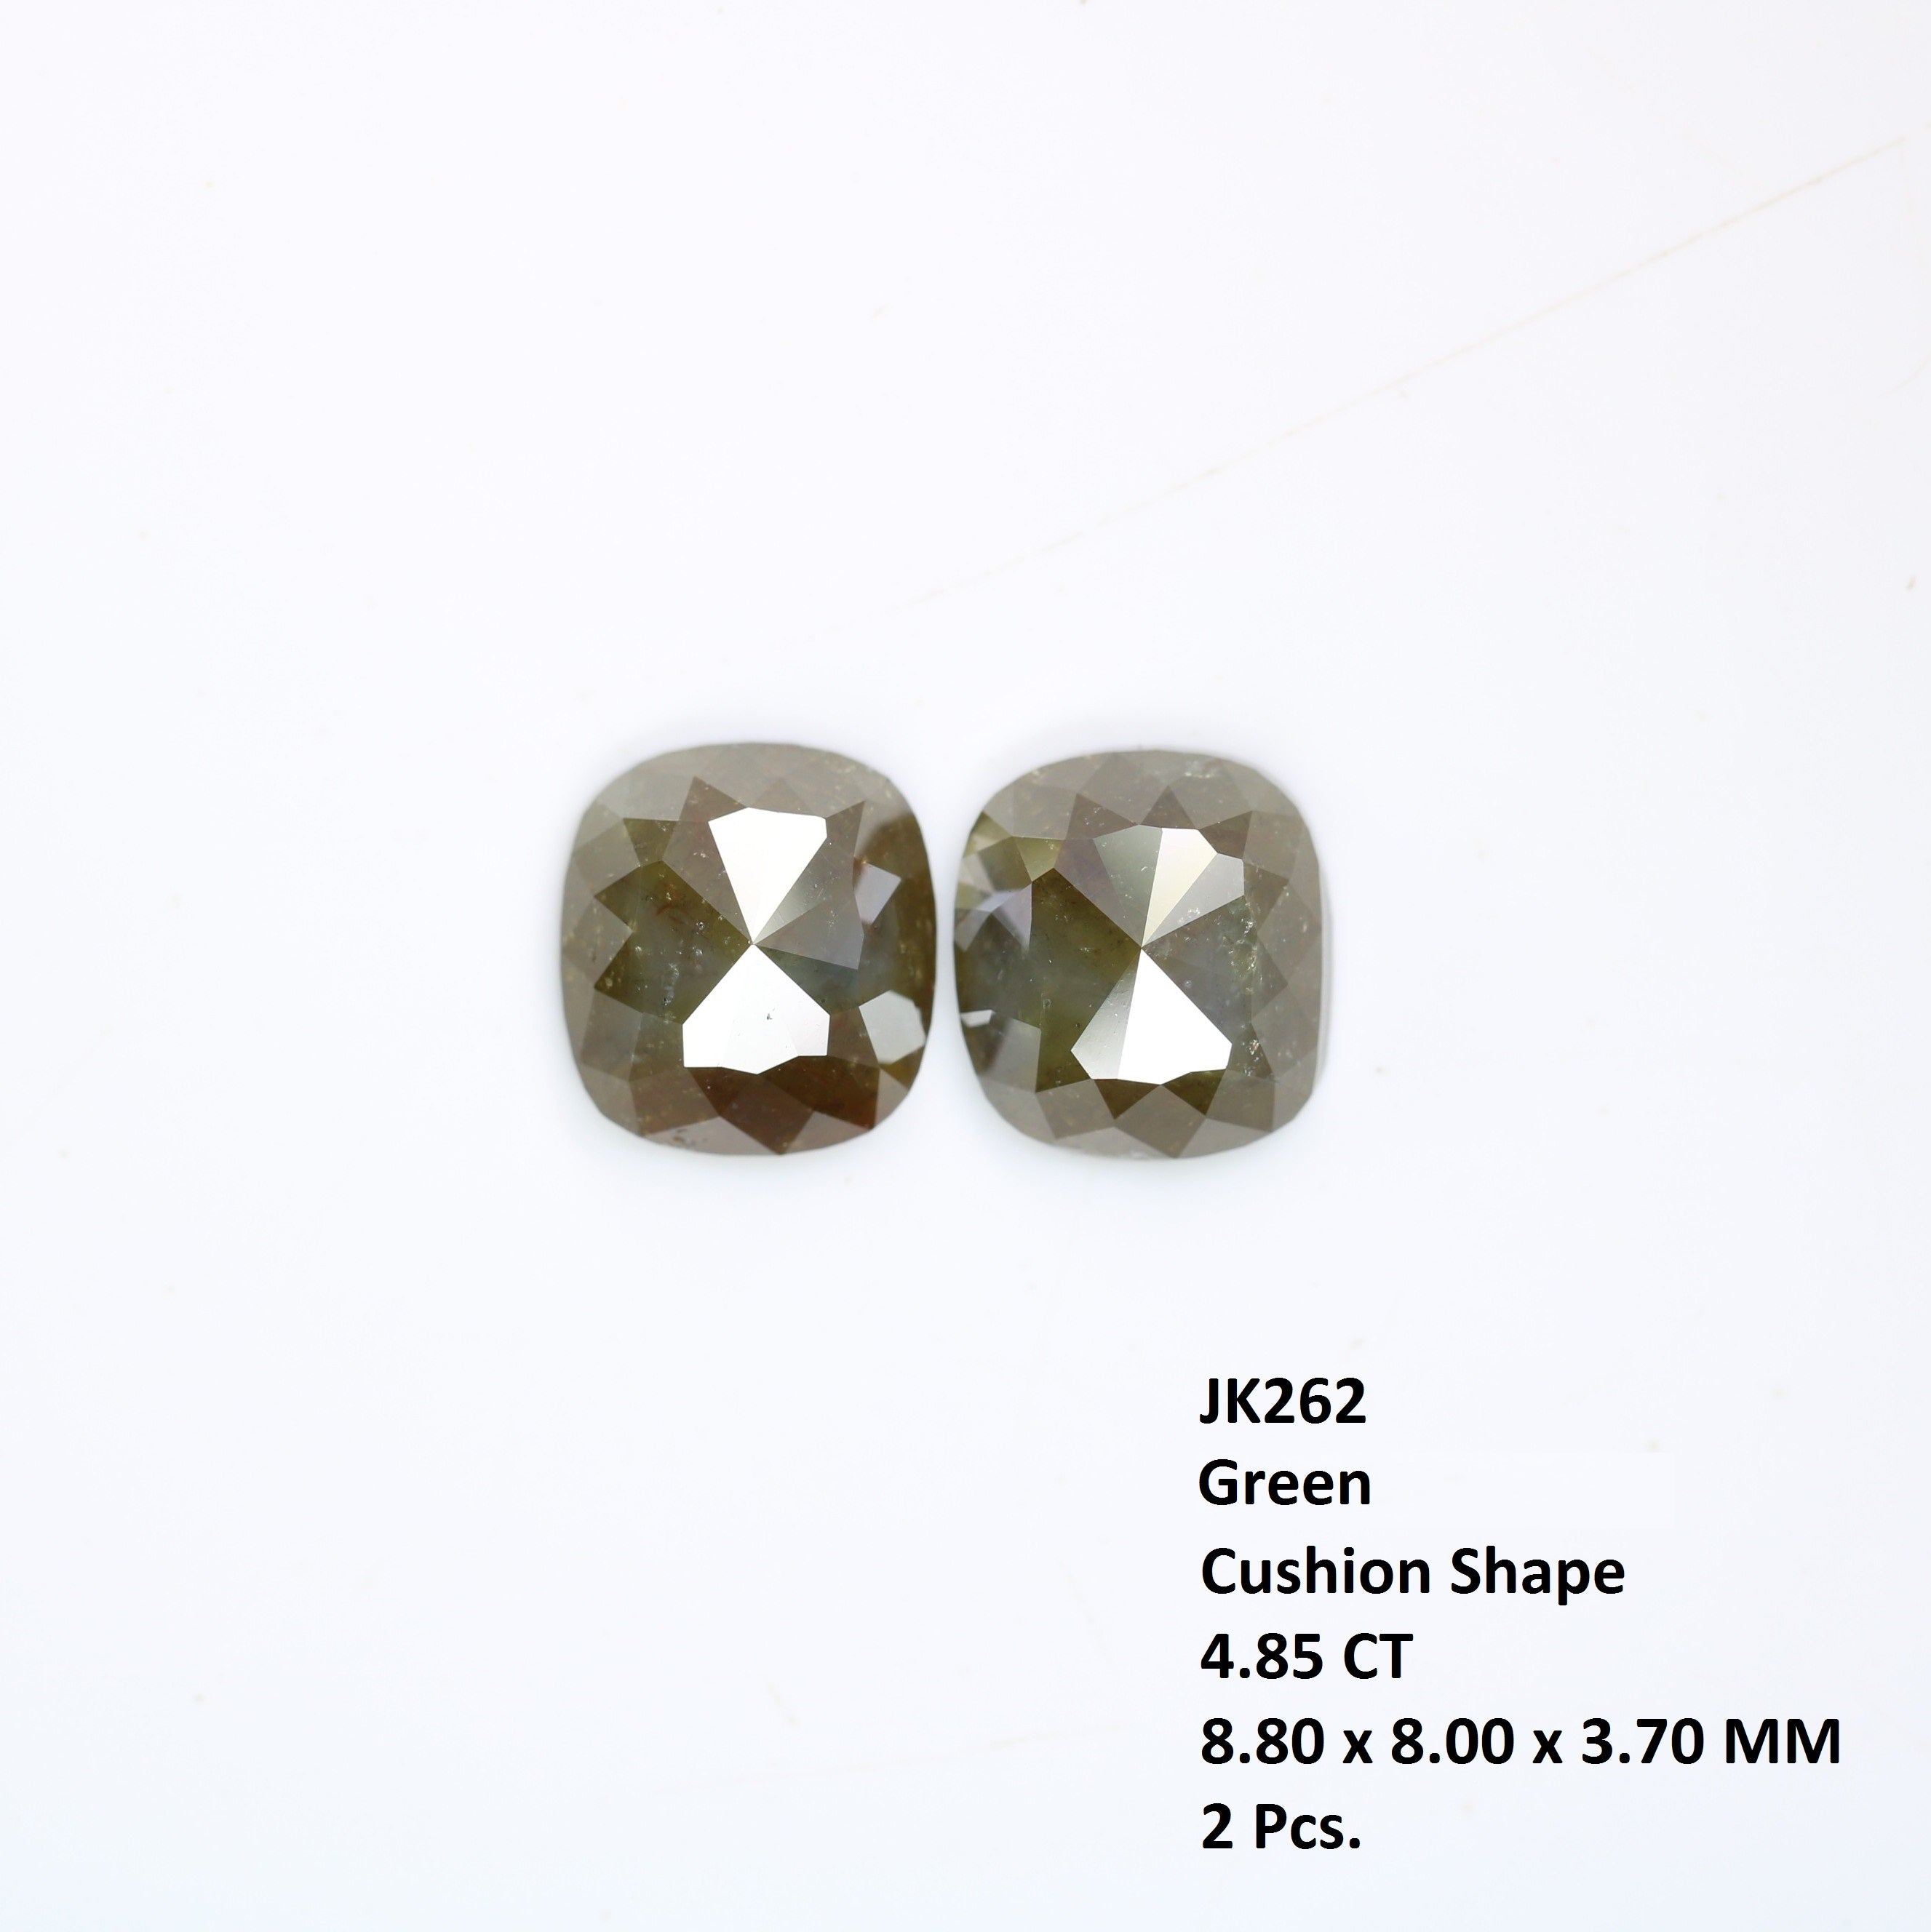 4.85 Carat Cushion Shaped Natural Green Color Loose Diamond Pair For Diamond Earring